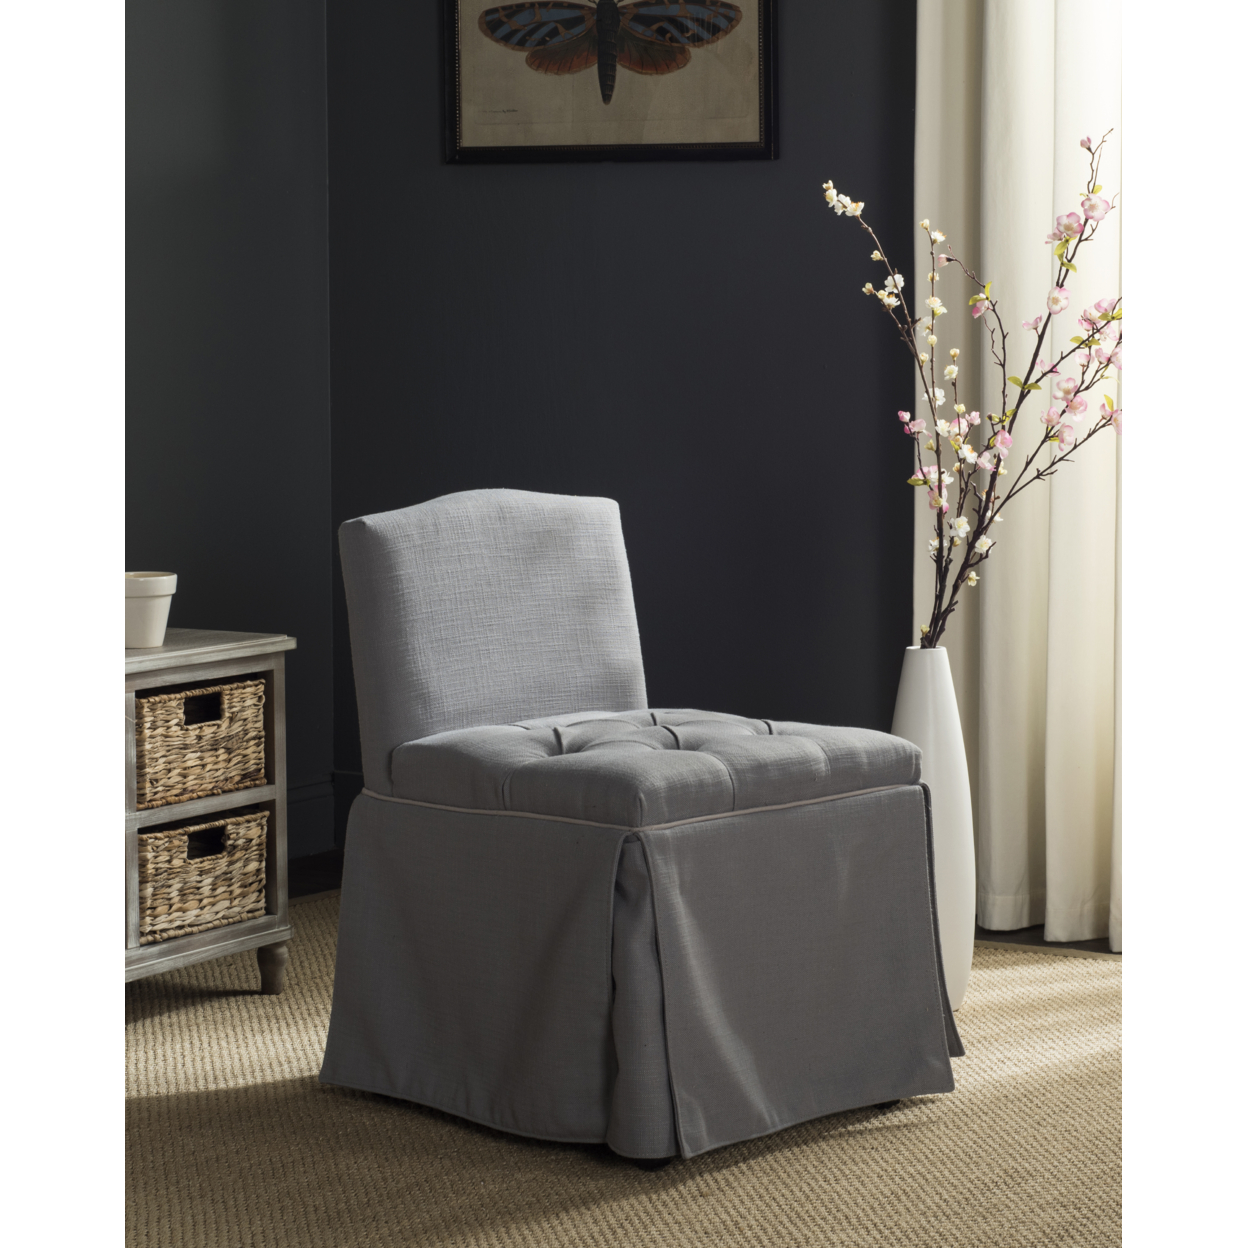 SAFAVIEH Betsy Vanity Chair Artic Grey / Taupe